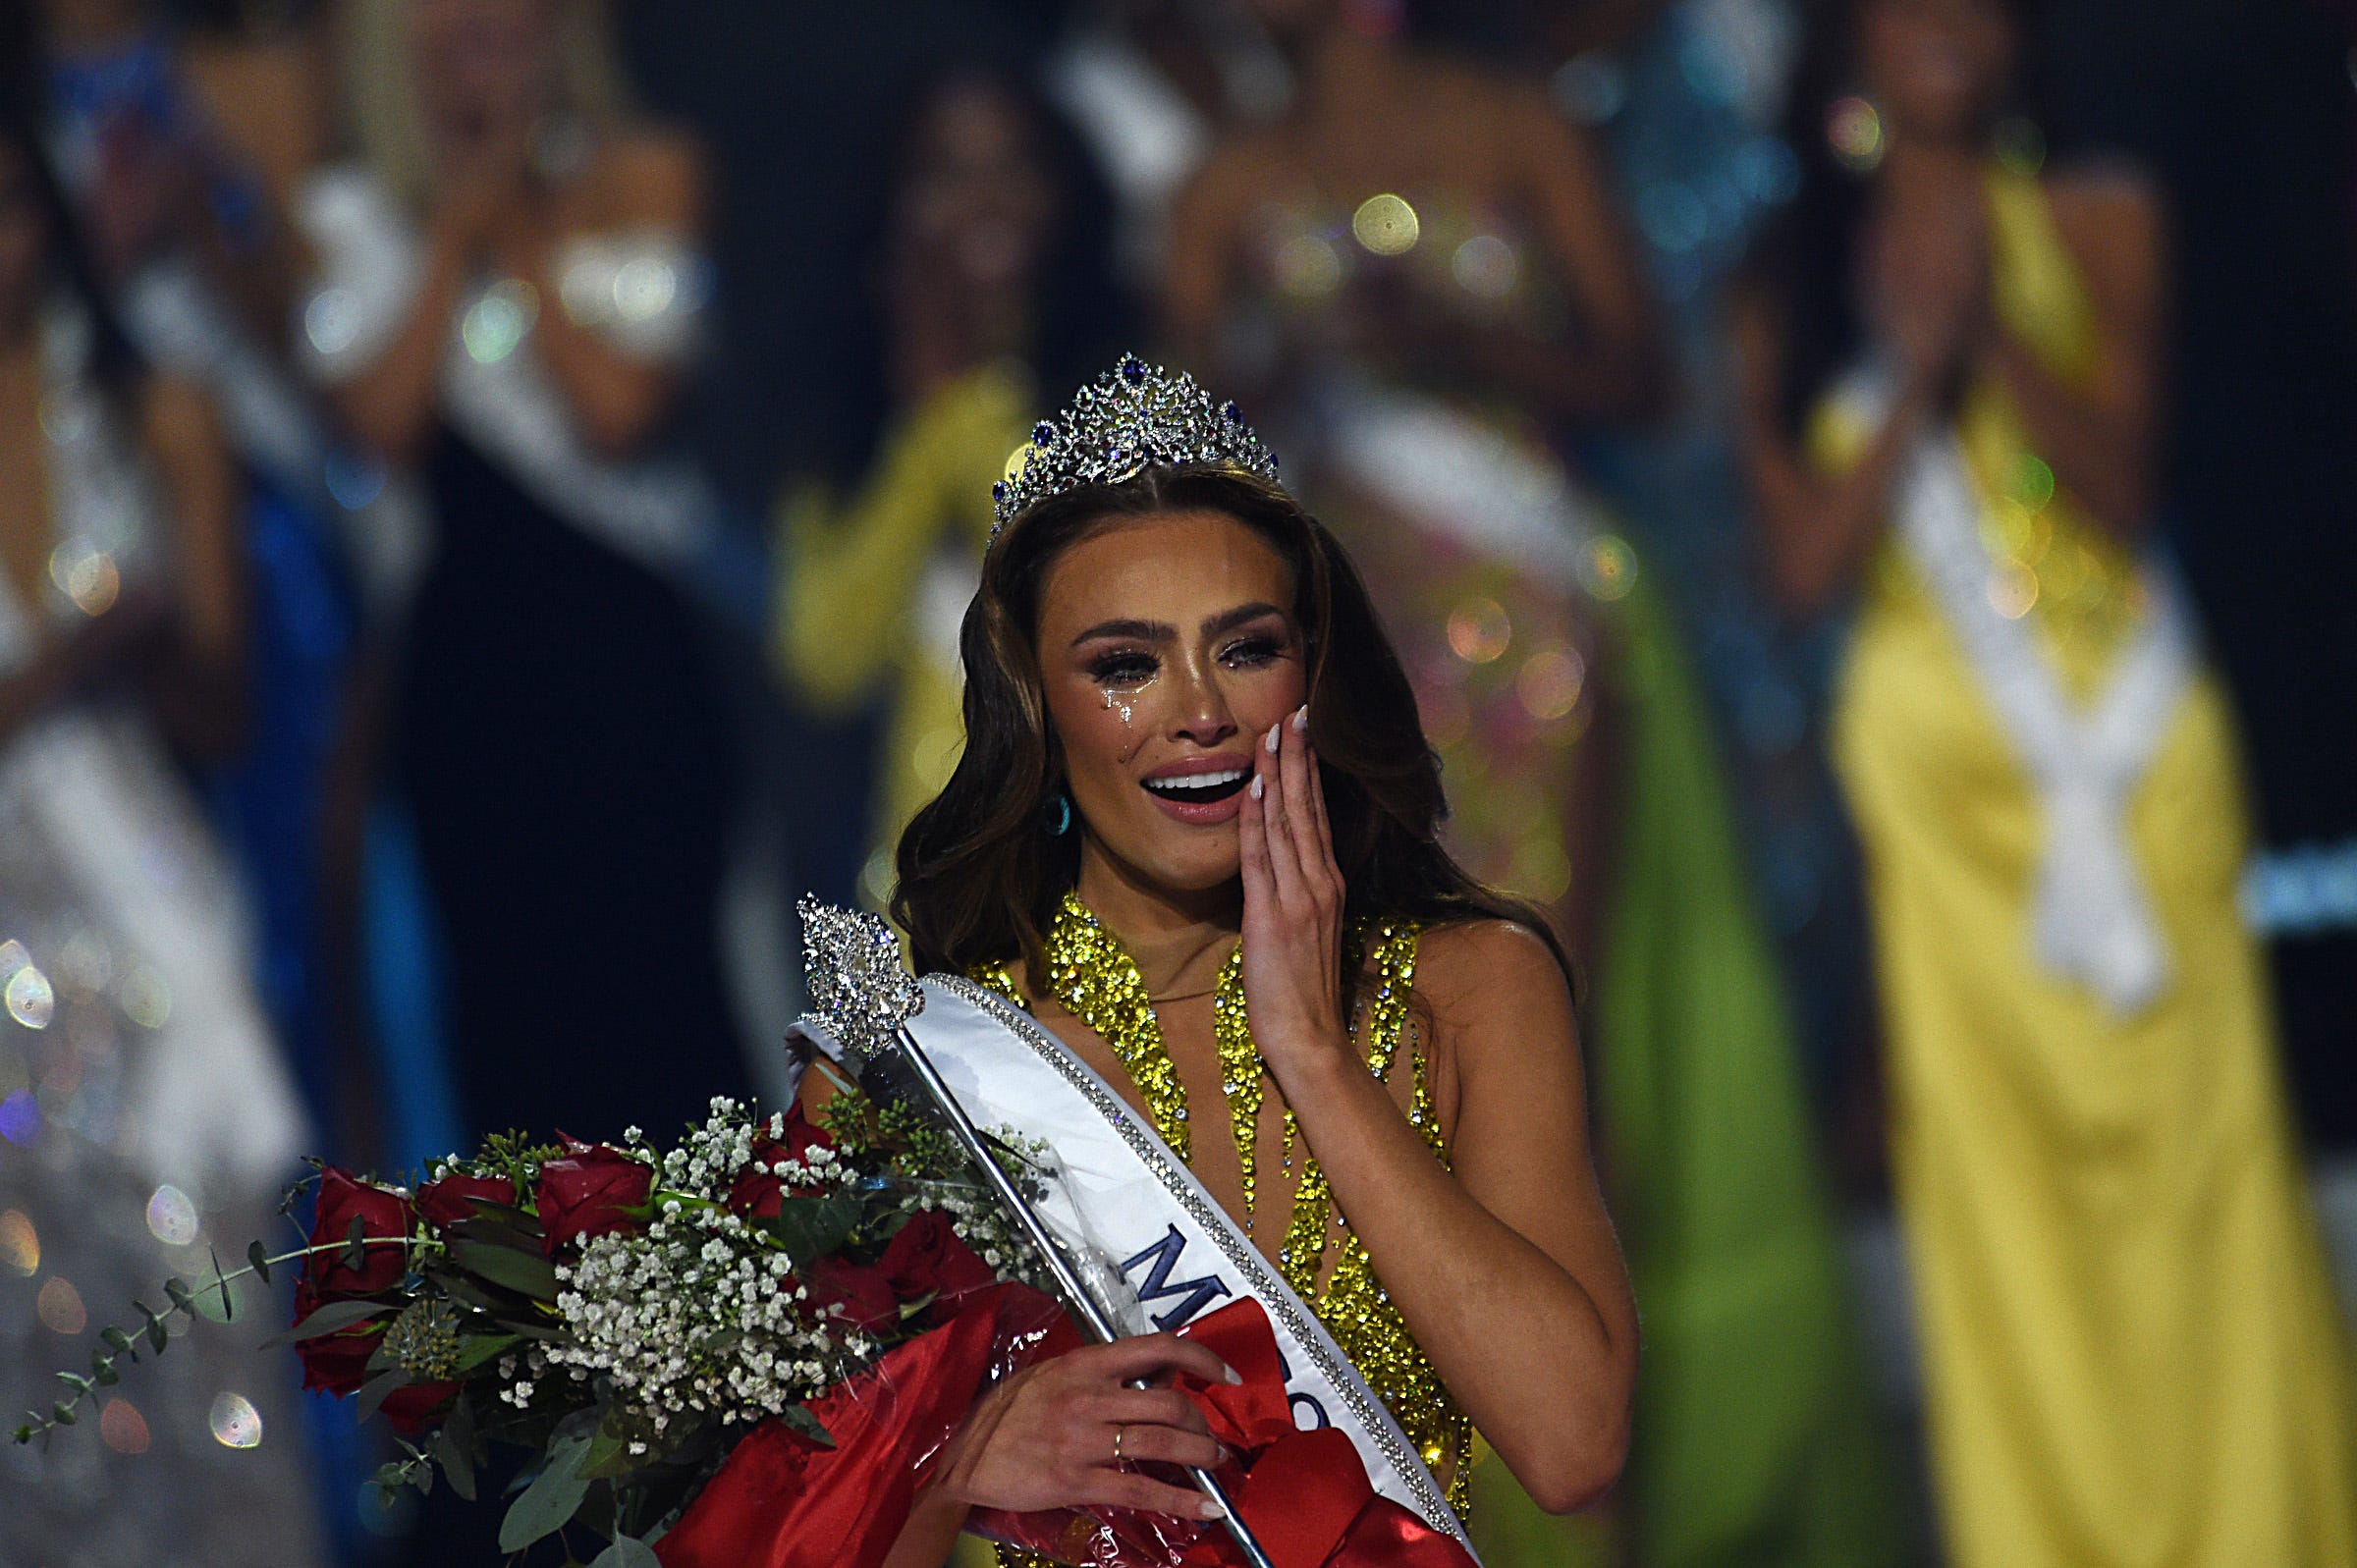 miss usa noelia voigt makes 'tough decision' to step down. read her full statement.